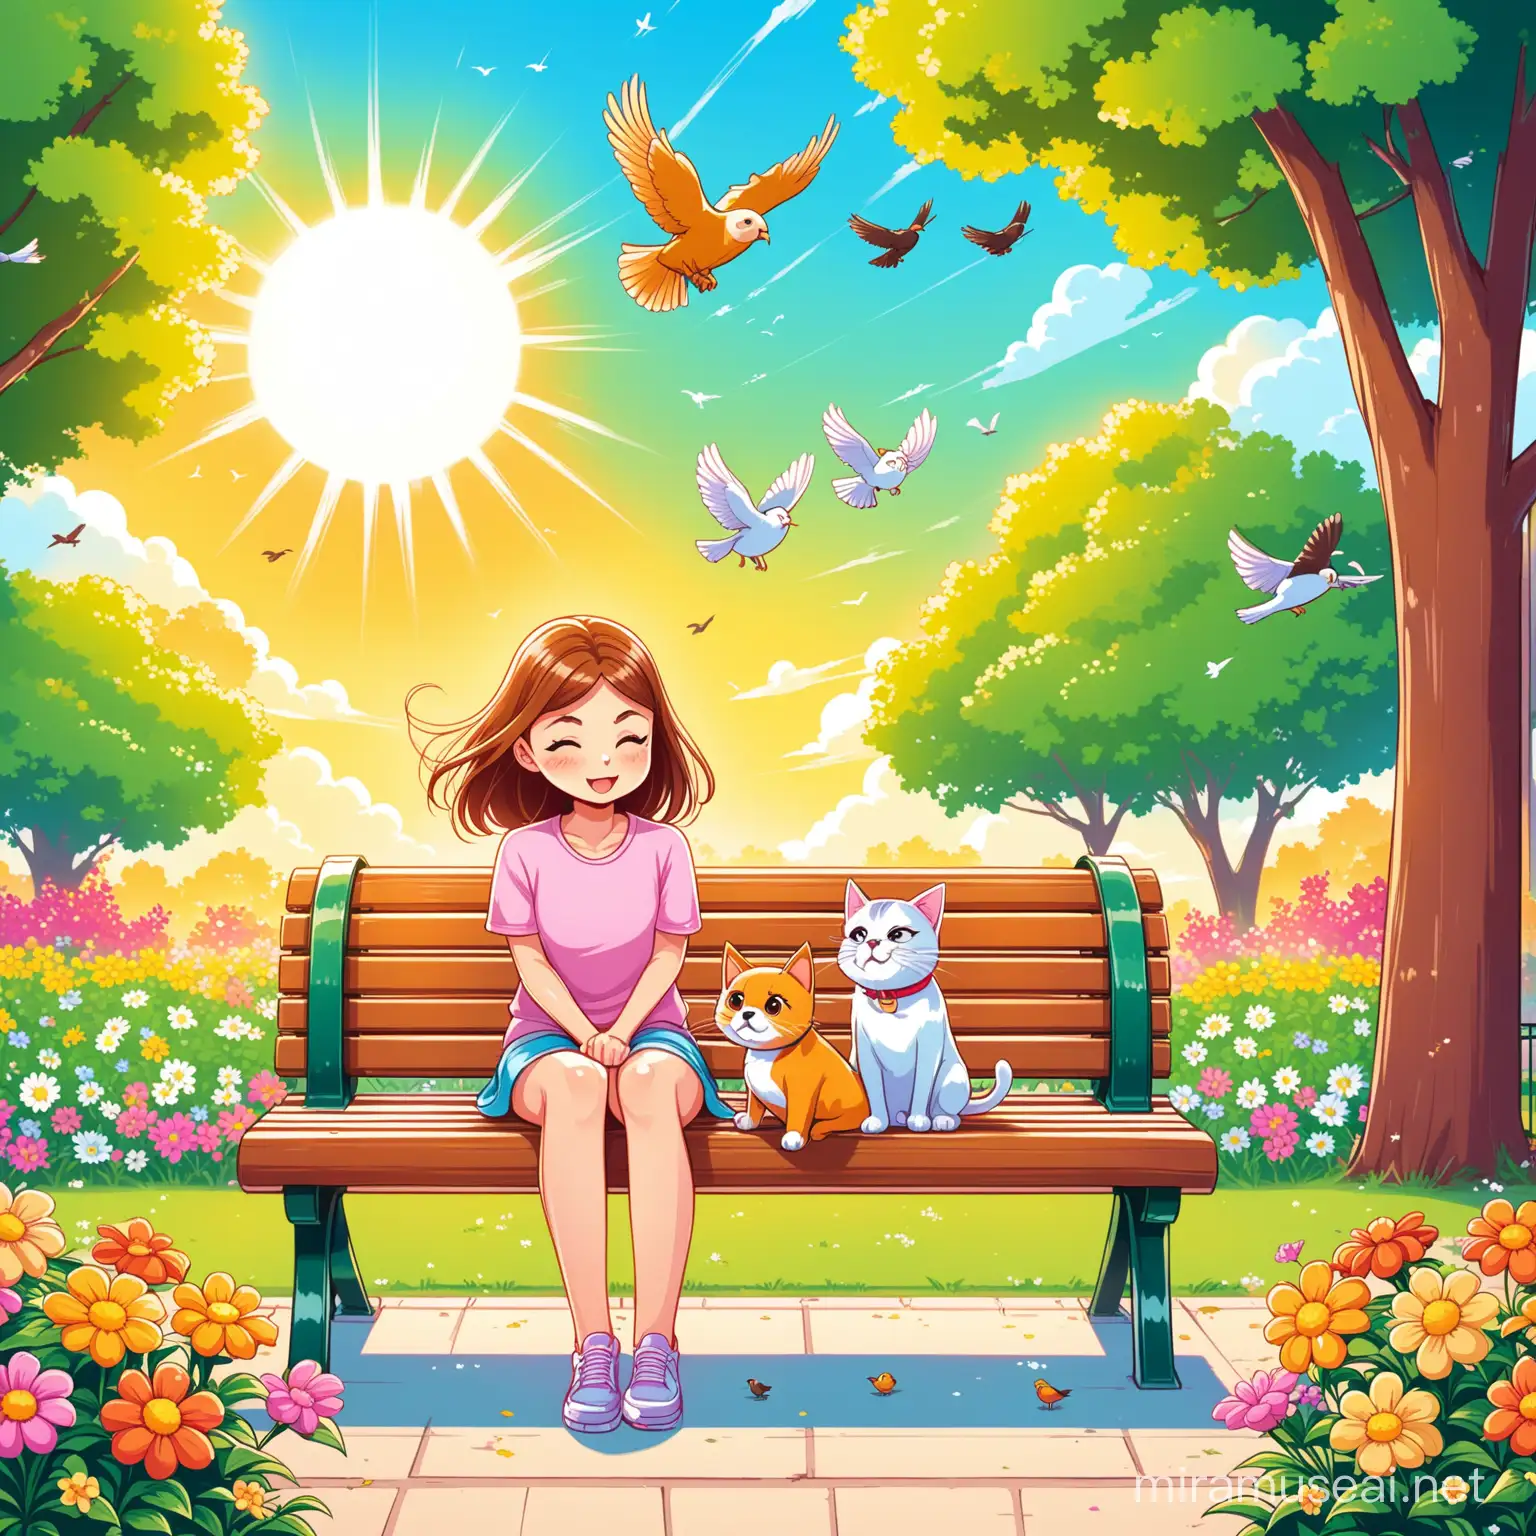 Girl with Dog Watching Cat Fight in Vibrant Park Scene